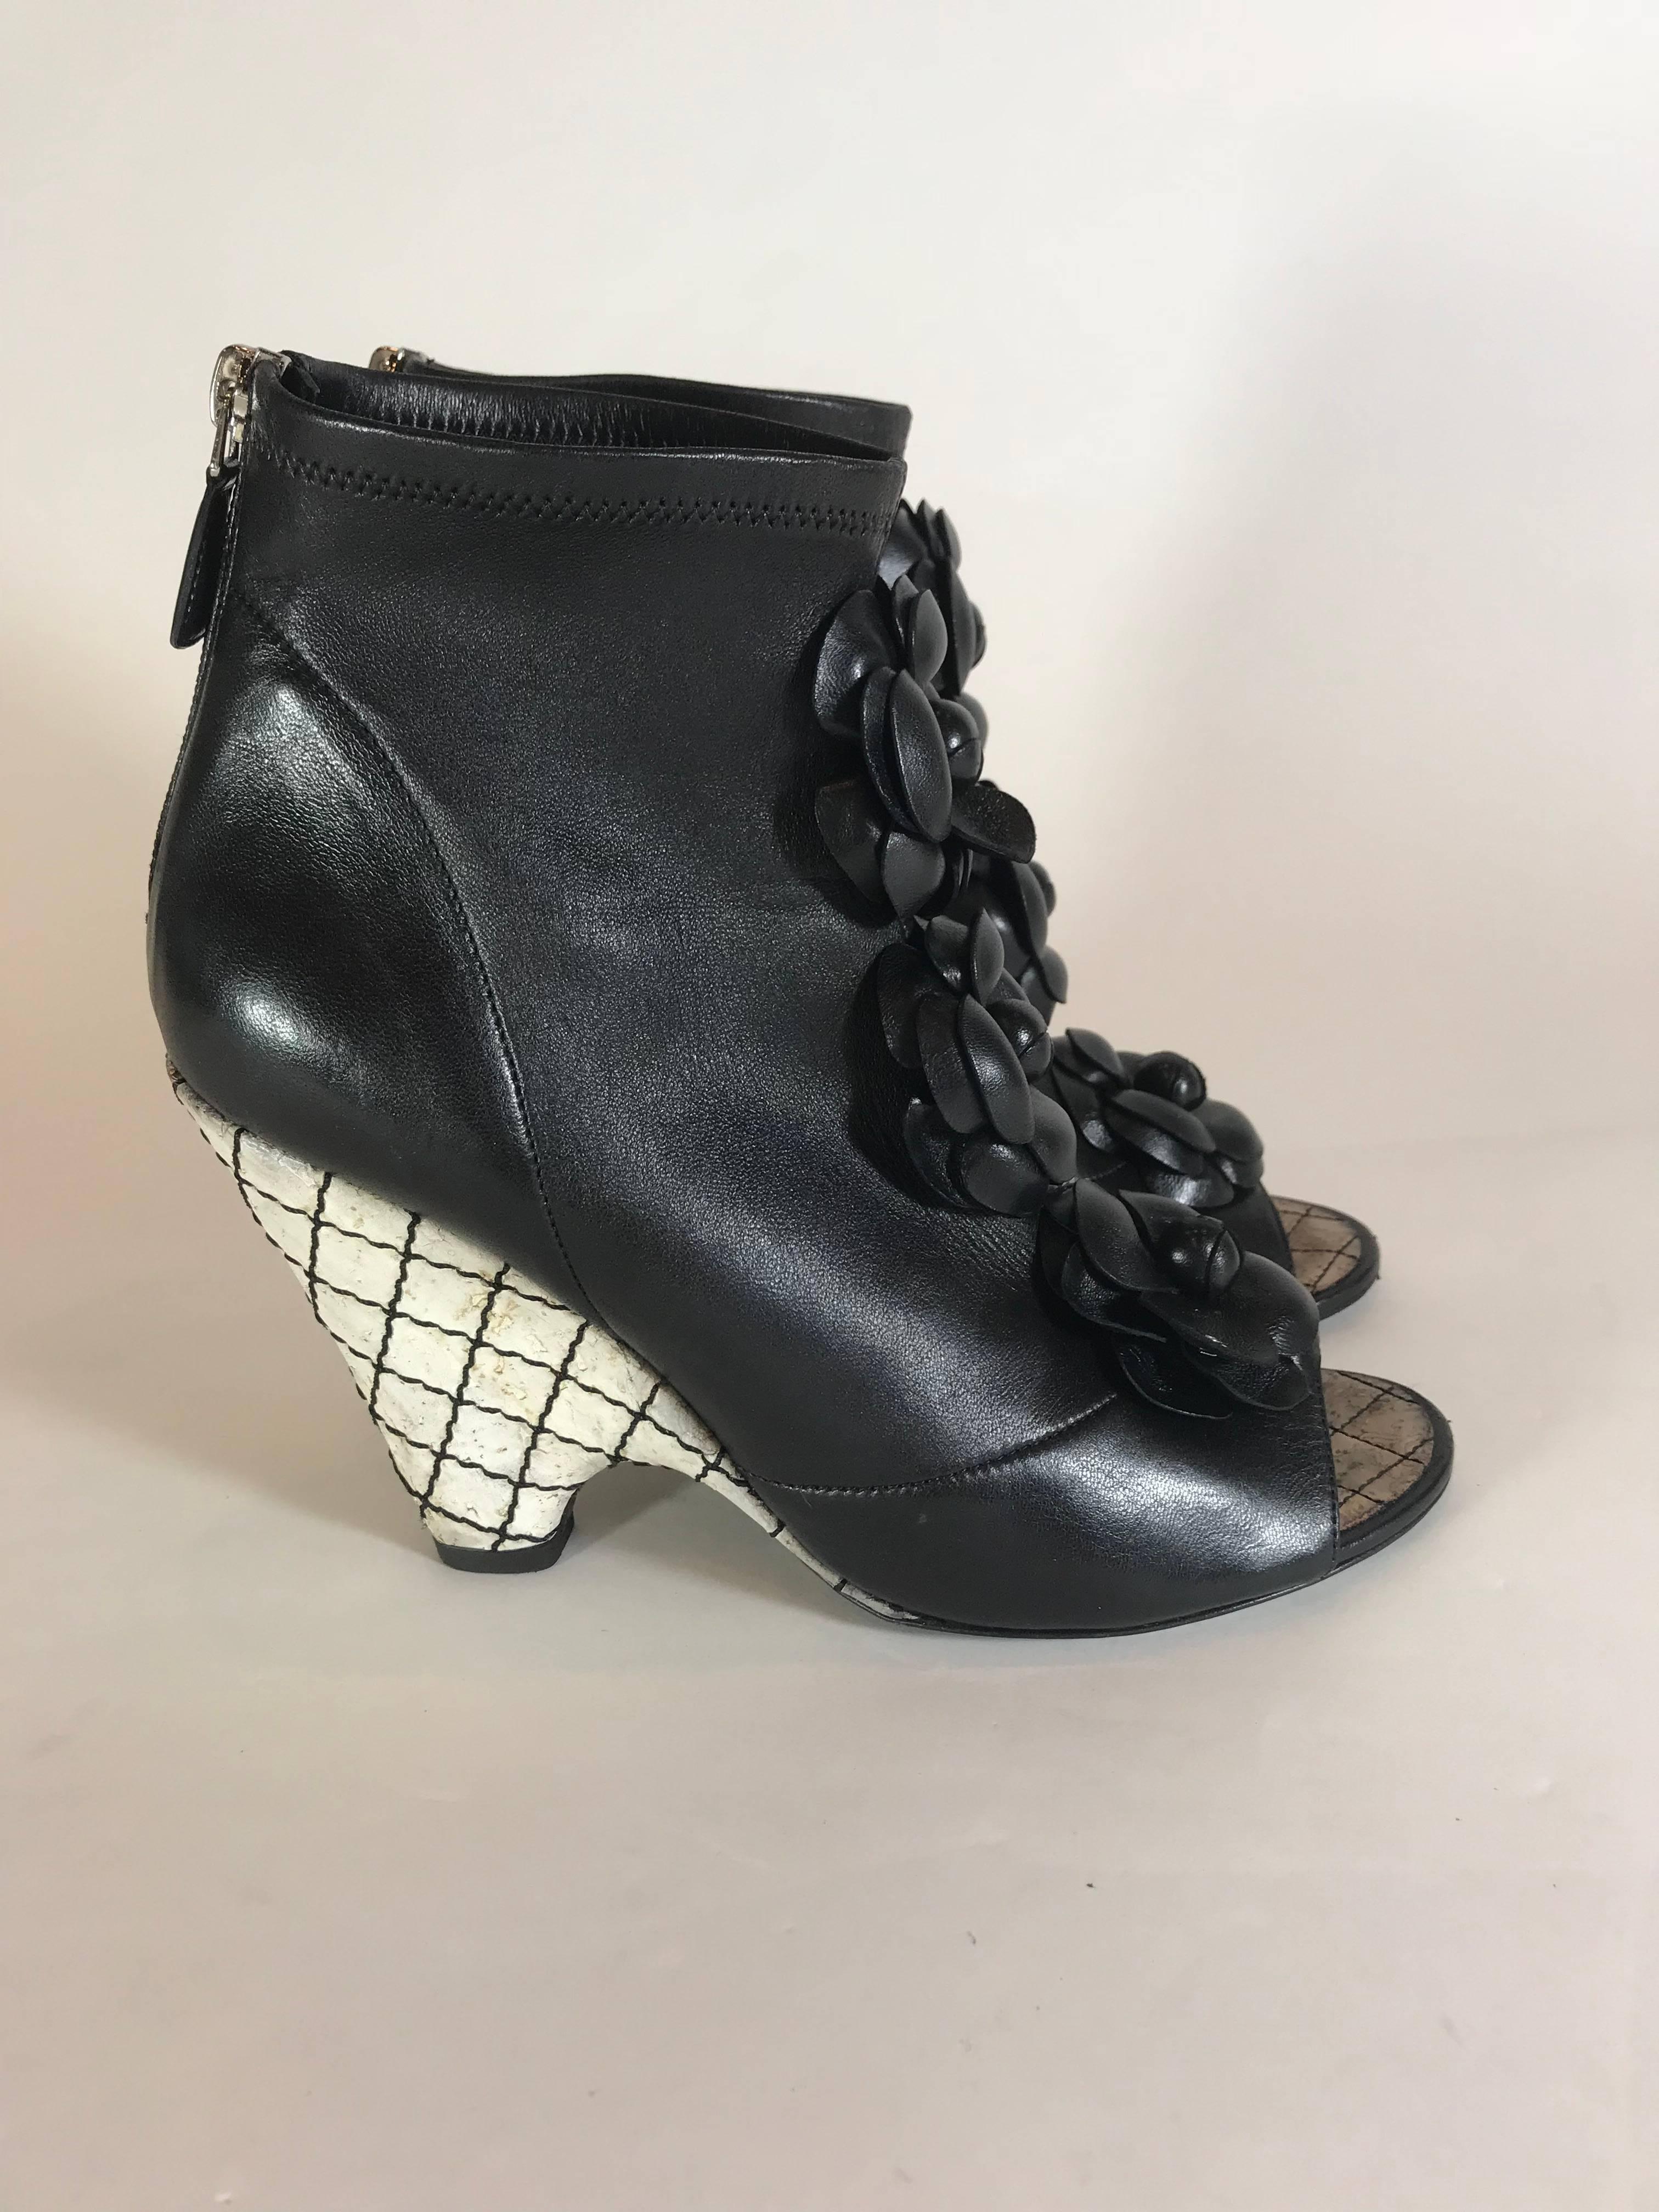 Black leather. Silver-tone hardware. Wedge heel with signature quilted design. Three flower decals on front. Zipper closure at back.